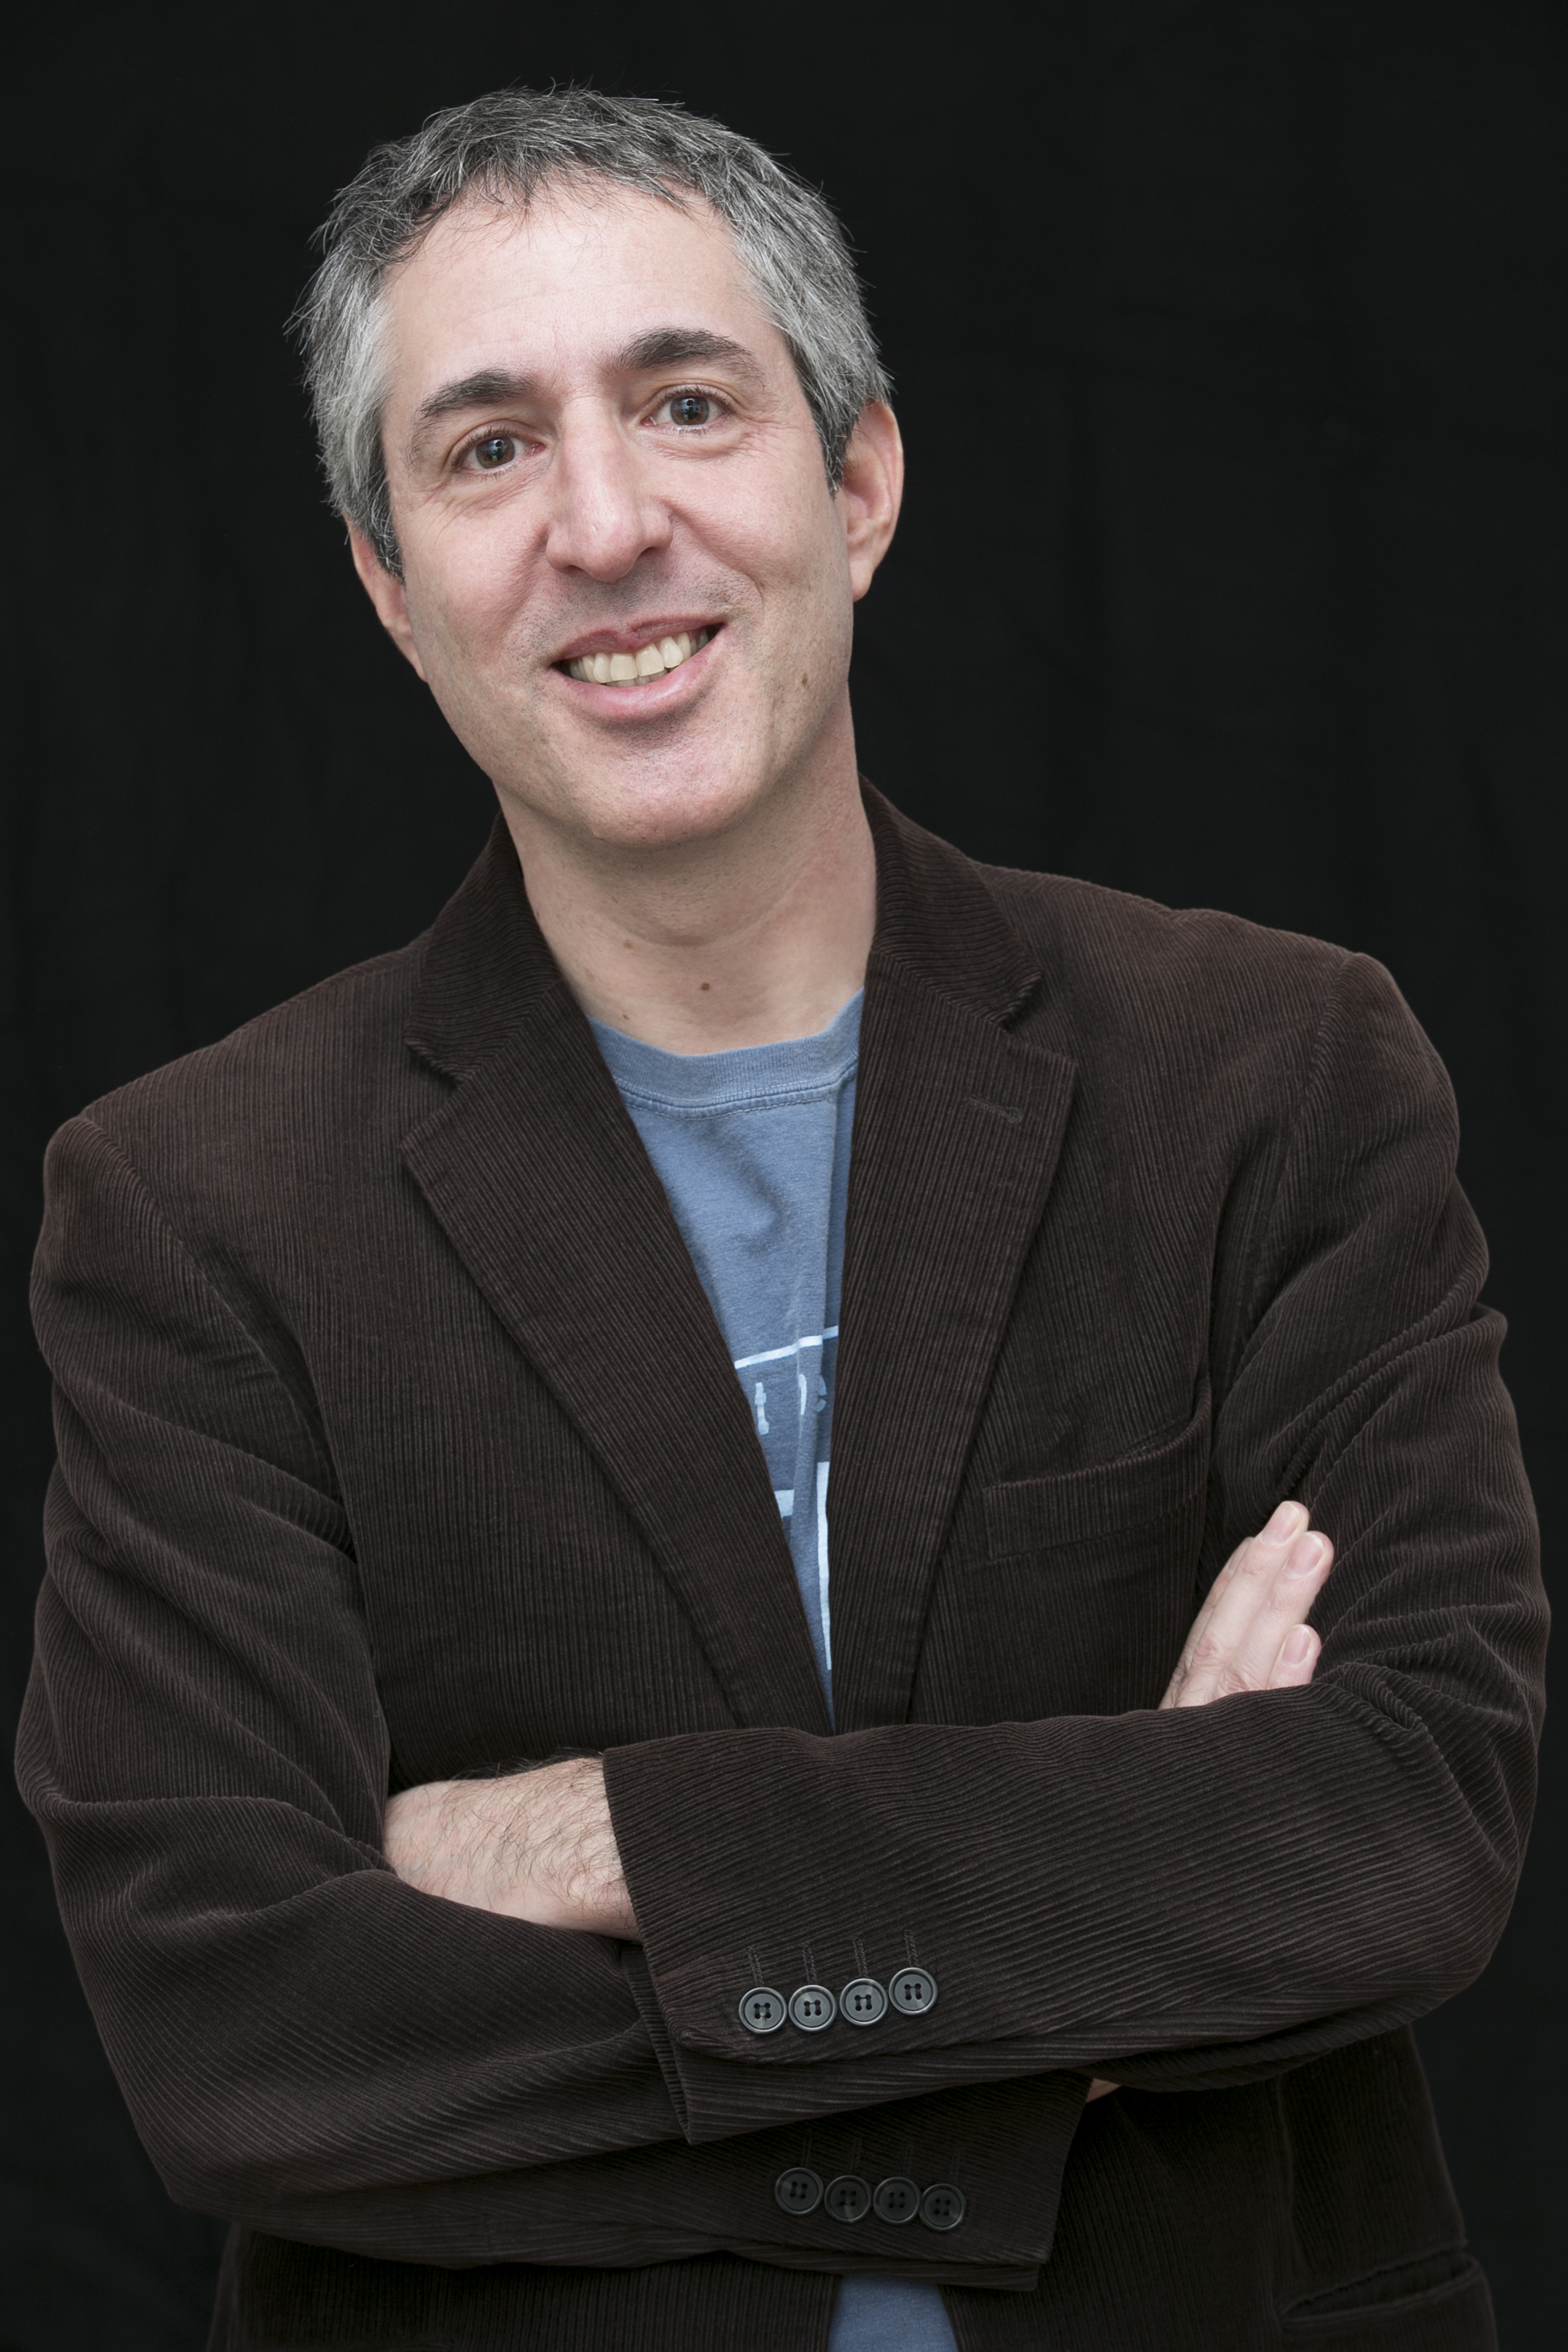 Photograph of Alex Zucker with his arms folded, in a brown corduroy jacket with a blue t-shirt on underneath